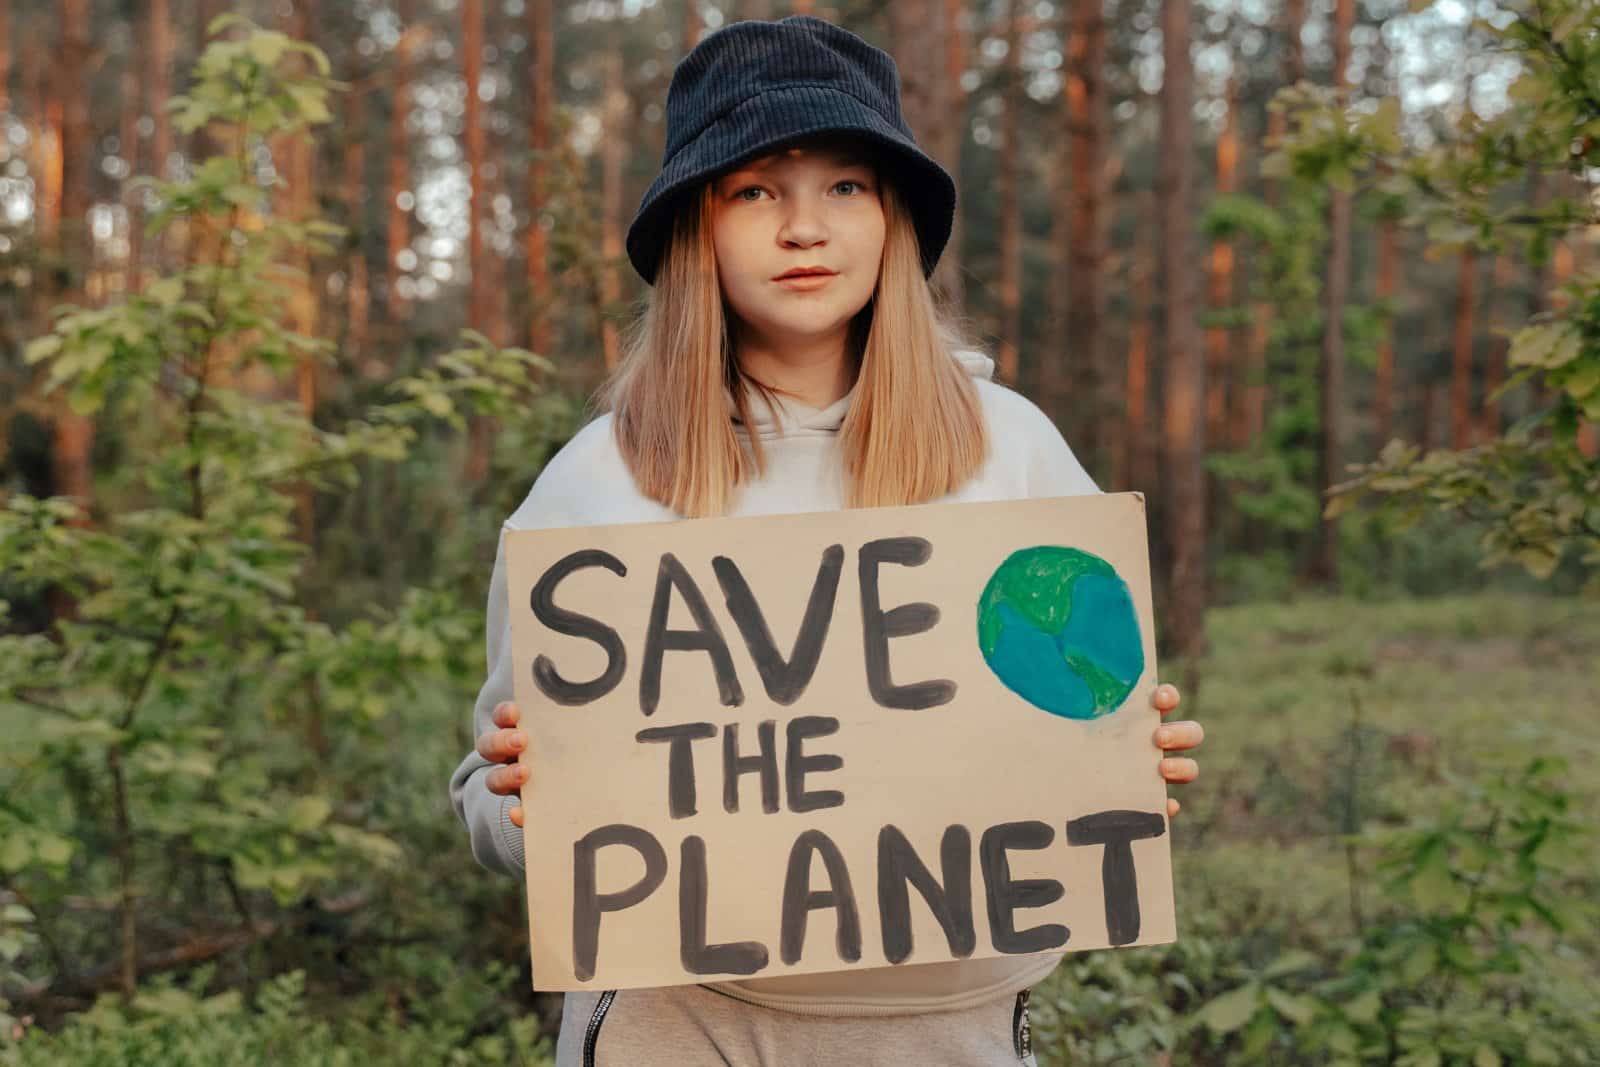 <p class="wp-caption-text">Image Credit: Shutterstock / Krotnakro</p>  <p><span>Adopting a zero-waste approach to travel is a powerful way to explore the world responsibly, ensuring that your adventures leave a positive mark on the planet. By planning carefully, making sustainable choices, and respecting the environments and communities you visit, you can enjoy enriching travel experiences that align with your environmental values. Remember, every small action counts; collectively, conscious travelers can make a significant impact. As you embark on your next journey, carry with you the commitment to tread lightly and explore mindfully, paving the way for a more sustainable future in travel.</span></p>